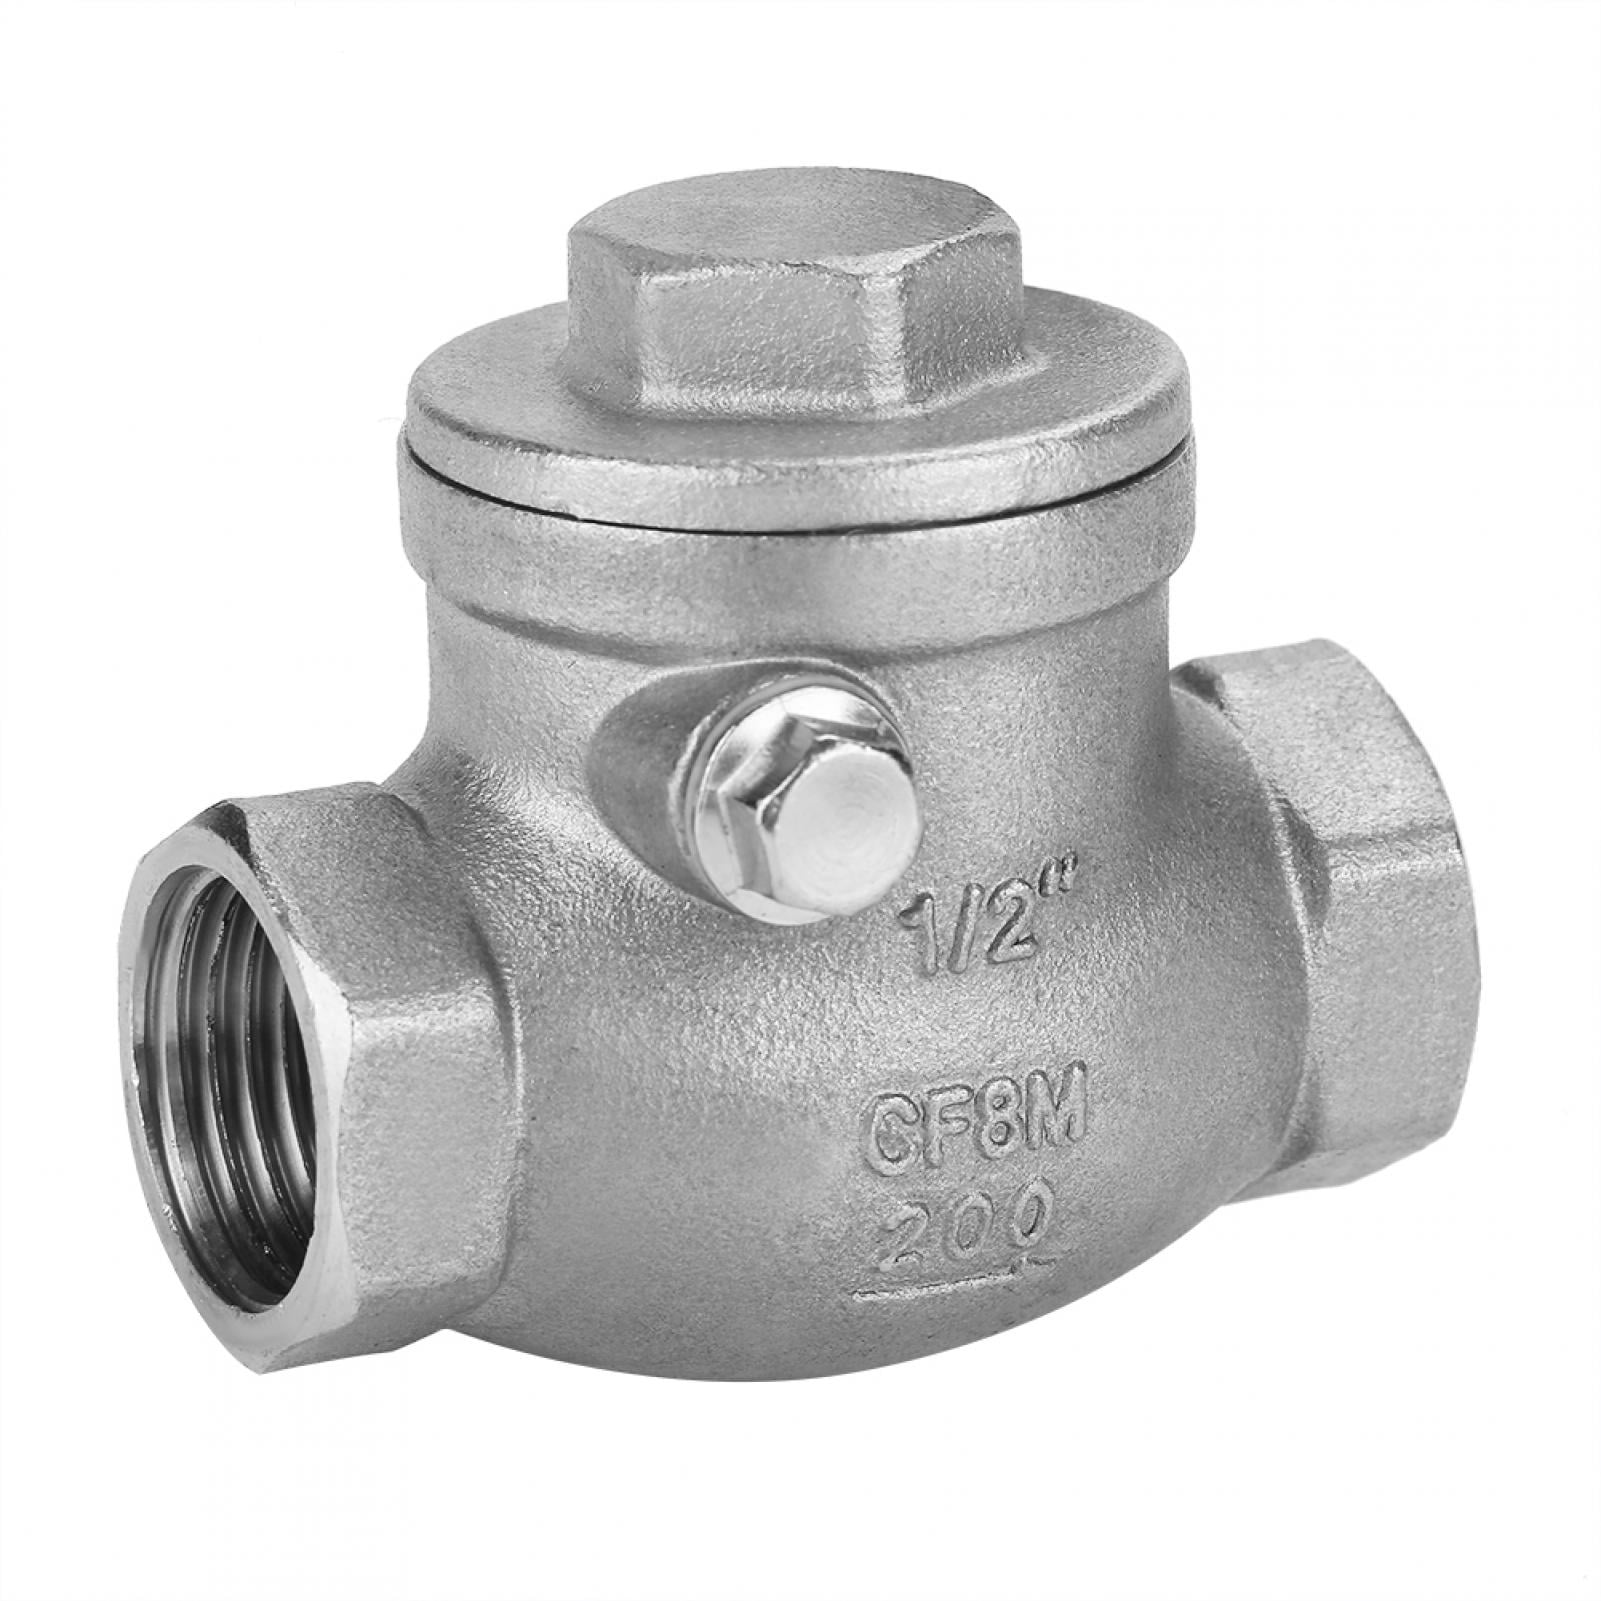 Durable Stainless Steel Swing Check Valve 1/2in Swing Check Valve with Good Resistance Good Sealing Capability for Chemical Fertilizer Pharmacy Petroleum